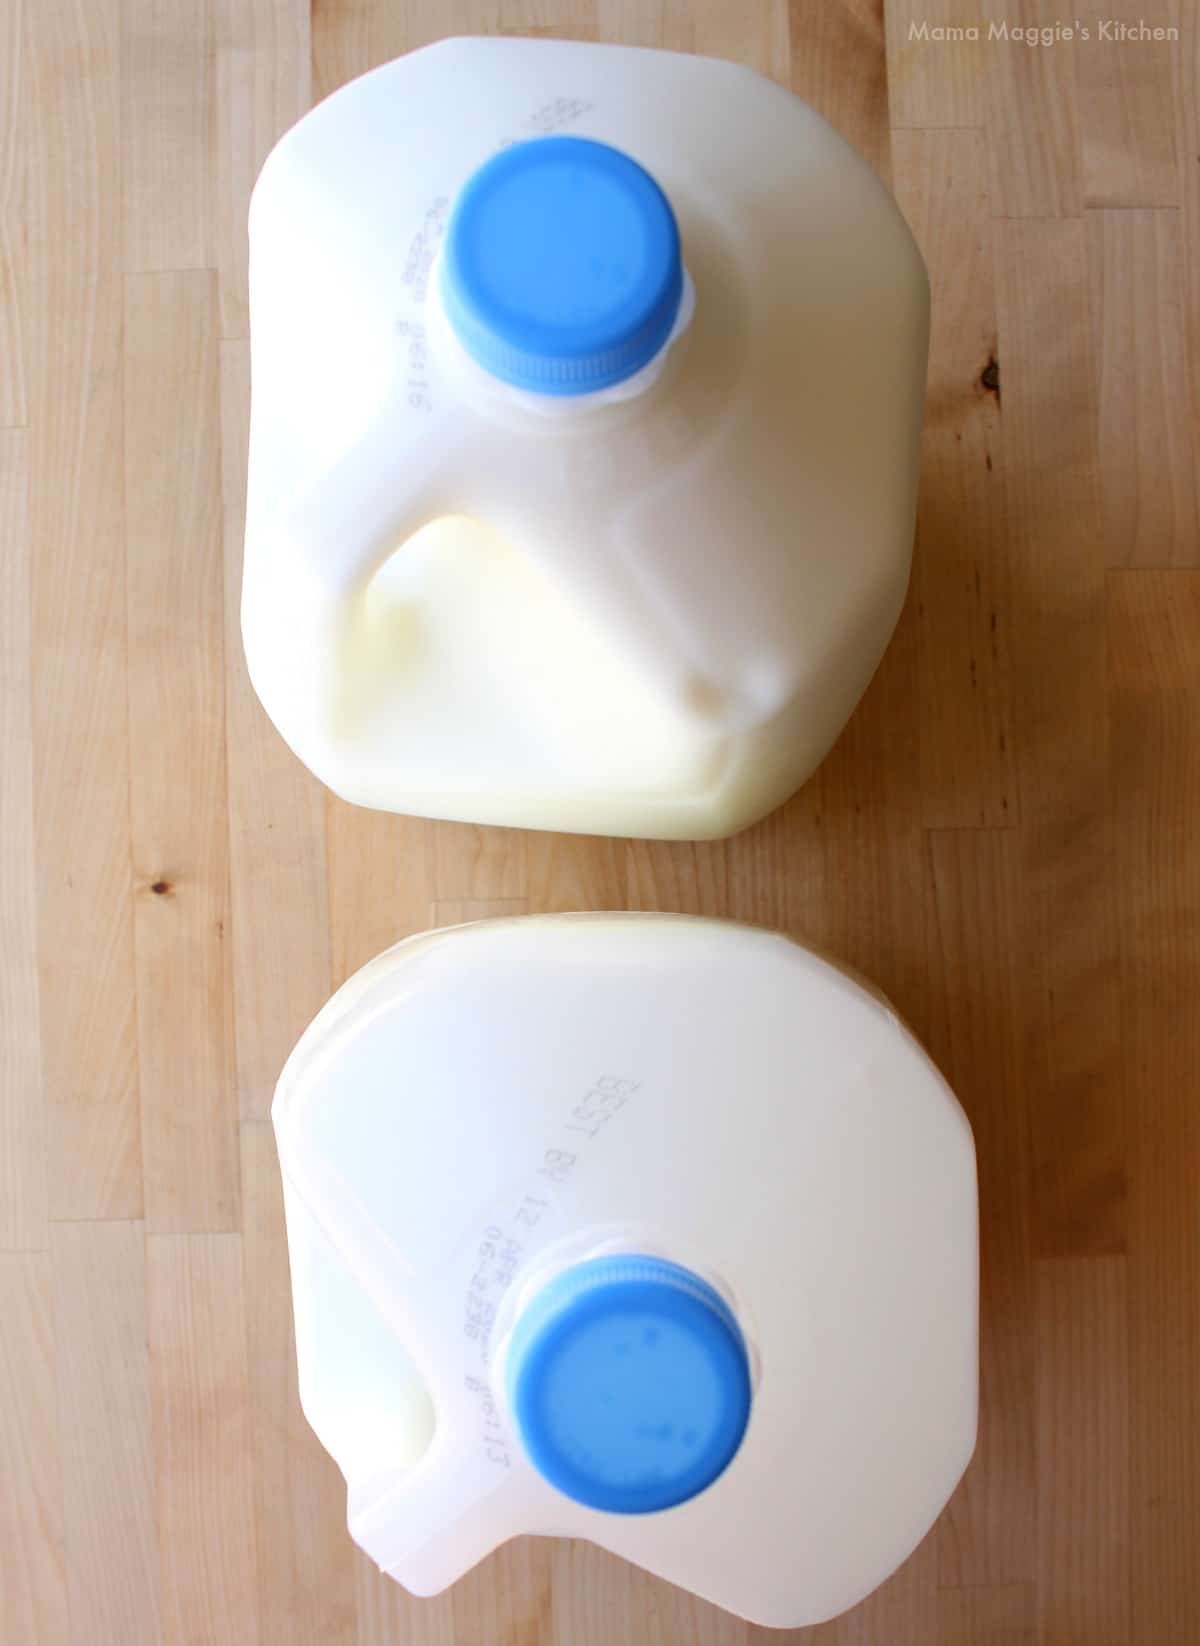 An overhead picture of two gallons of milk.